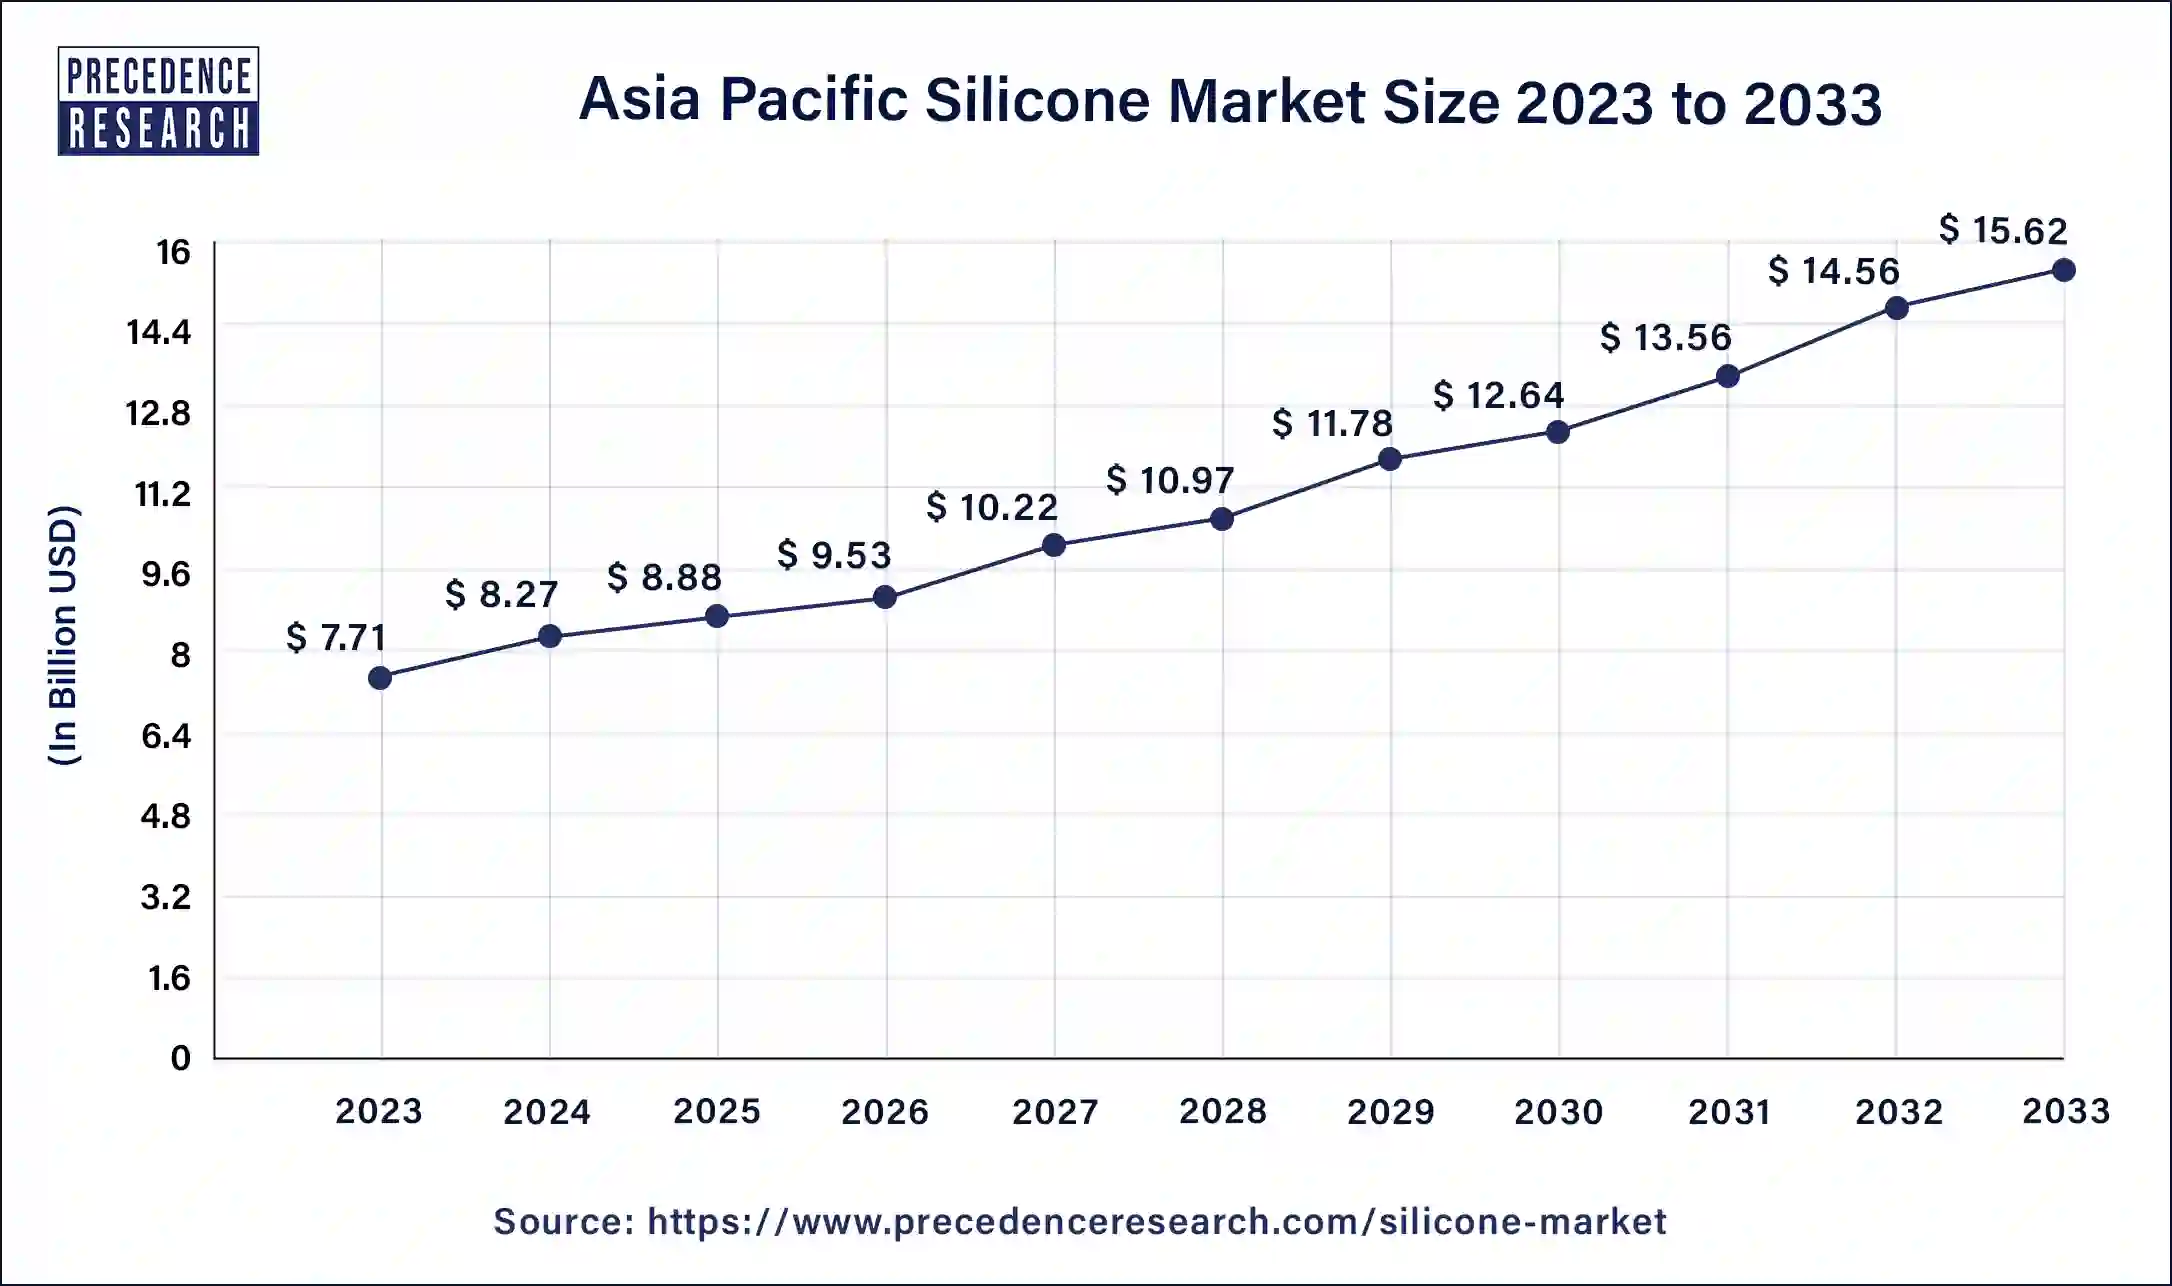 Asia Pacific Silicone Market Size 2024 to 2033